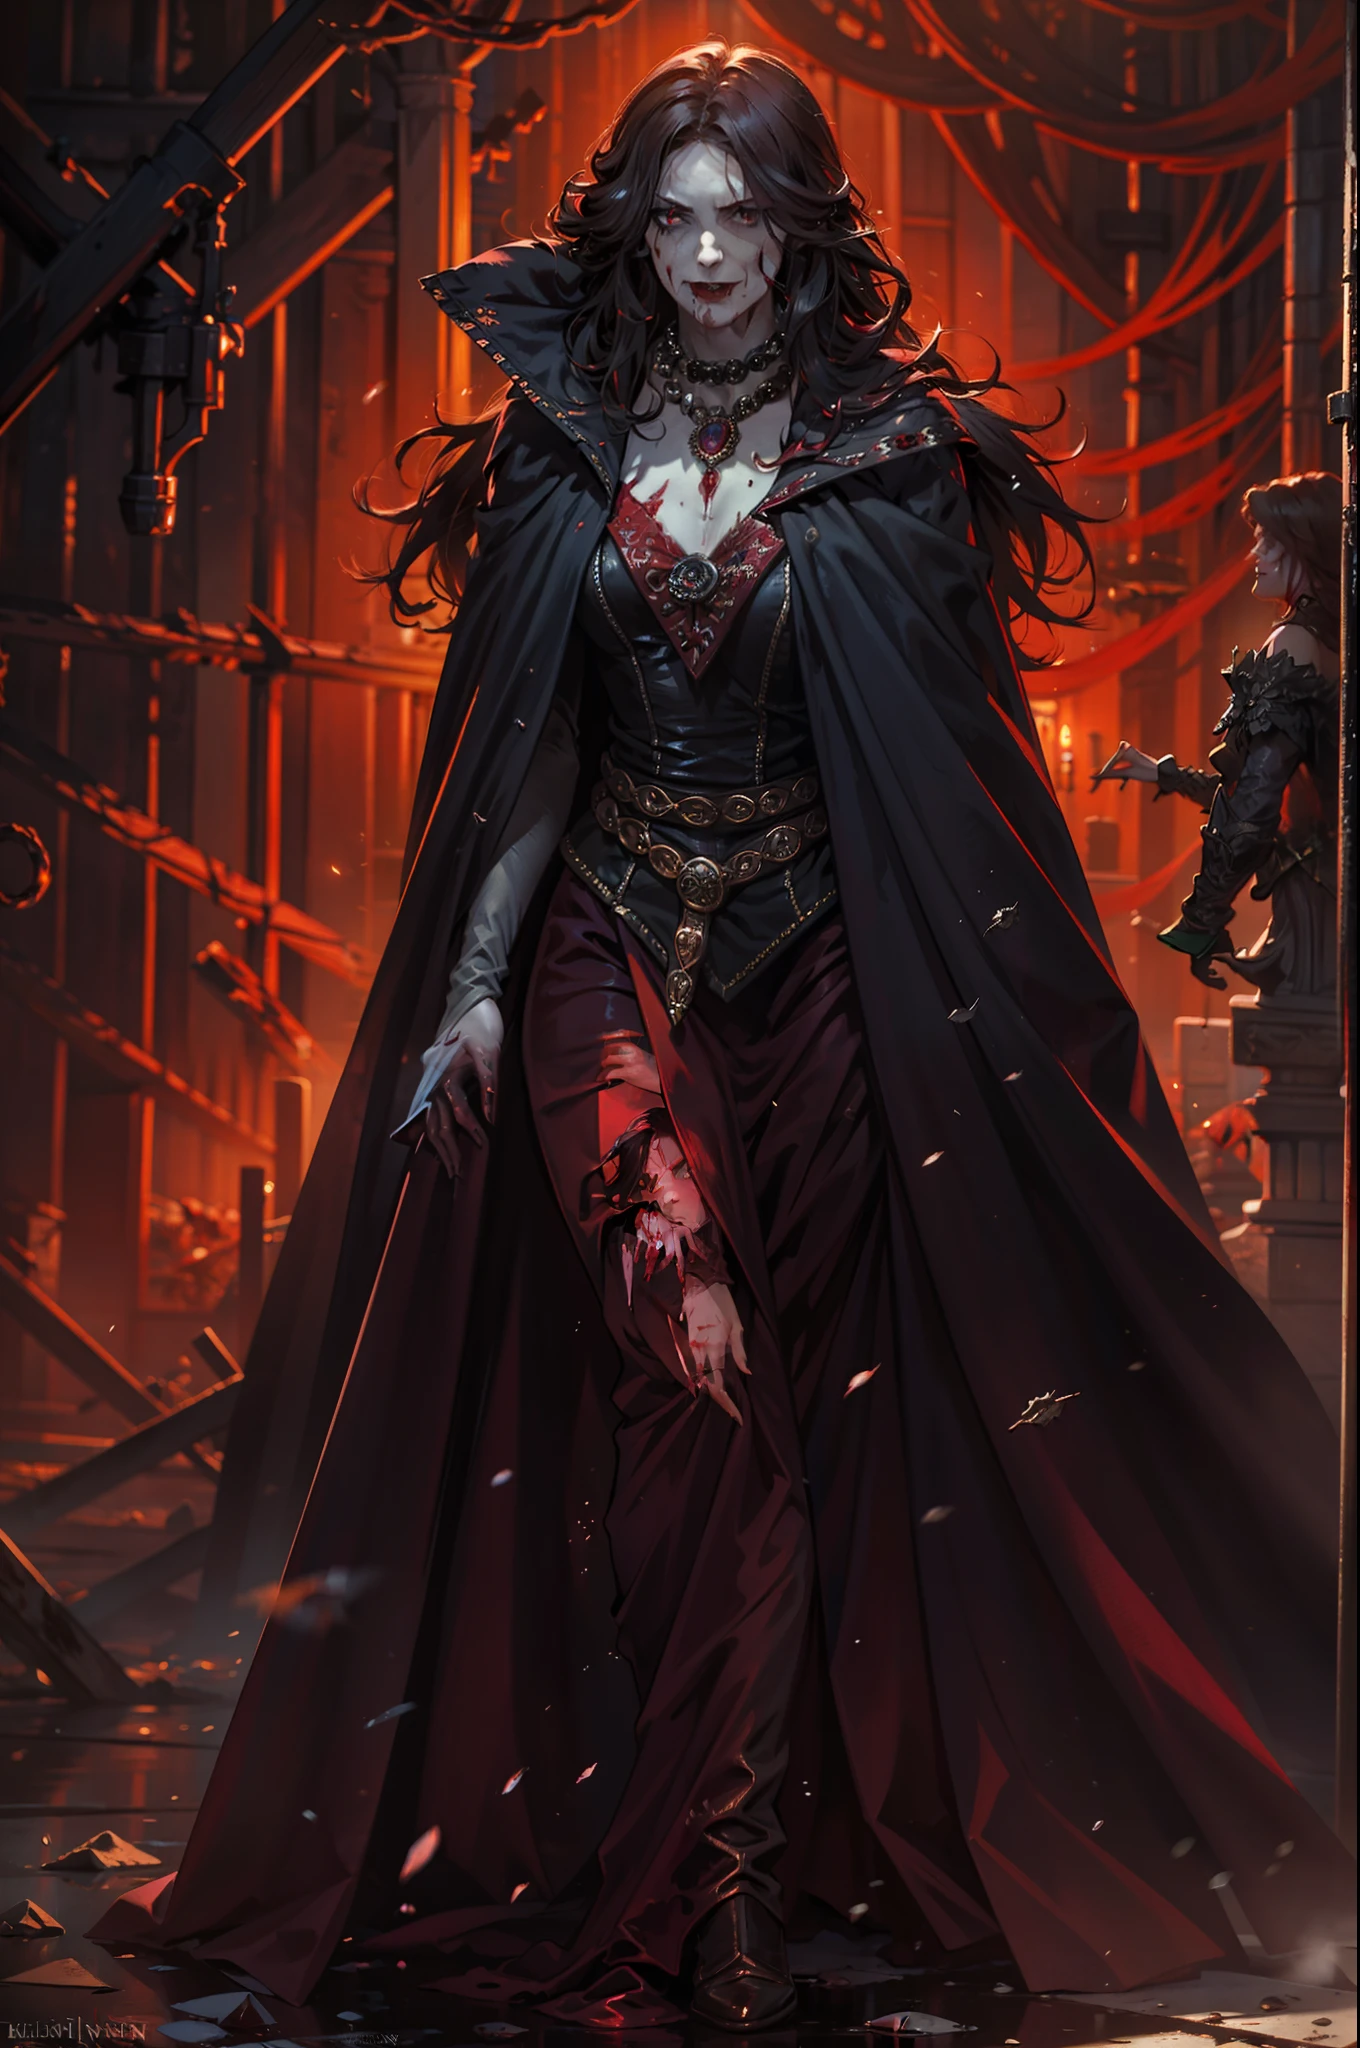 "An elegantly descending scary female vampire with a noble suit, flowing cloak, and a dark atmosphere, surrounded by blood effects."